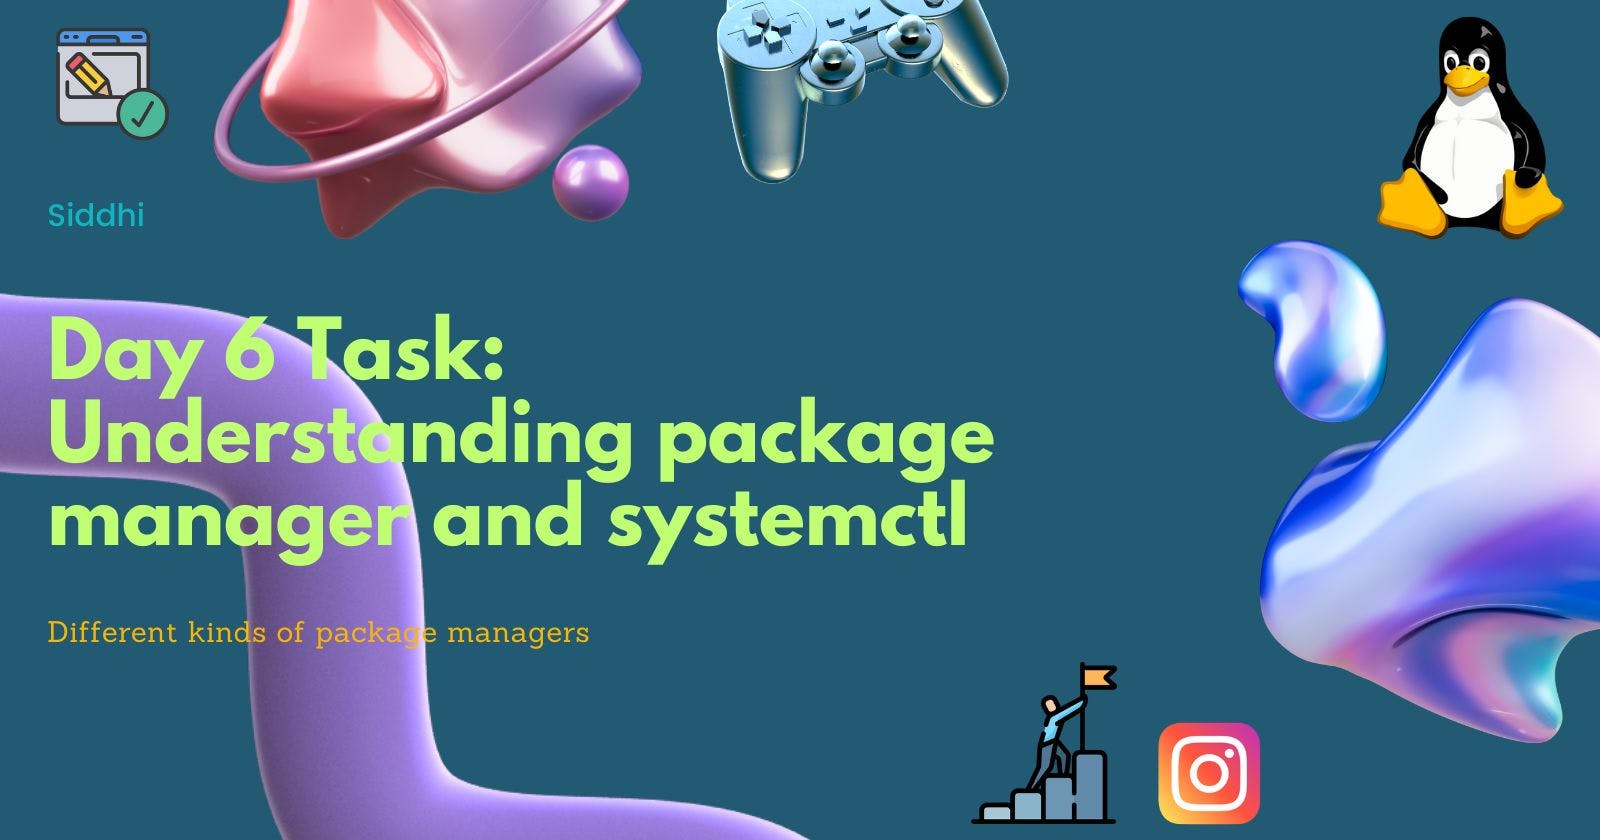 Day 6 Task: Understanding package manager and systemctl